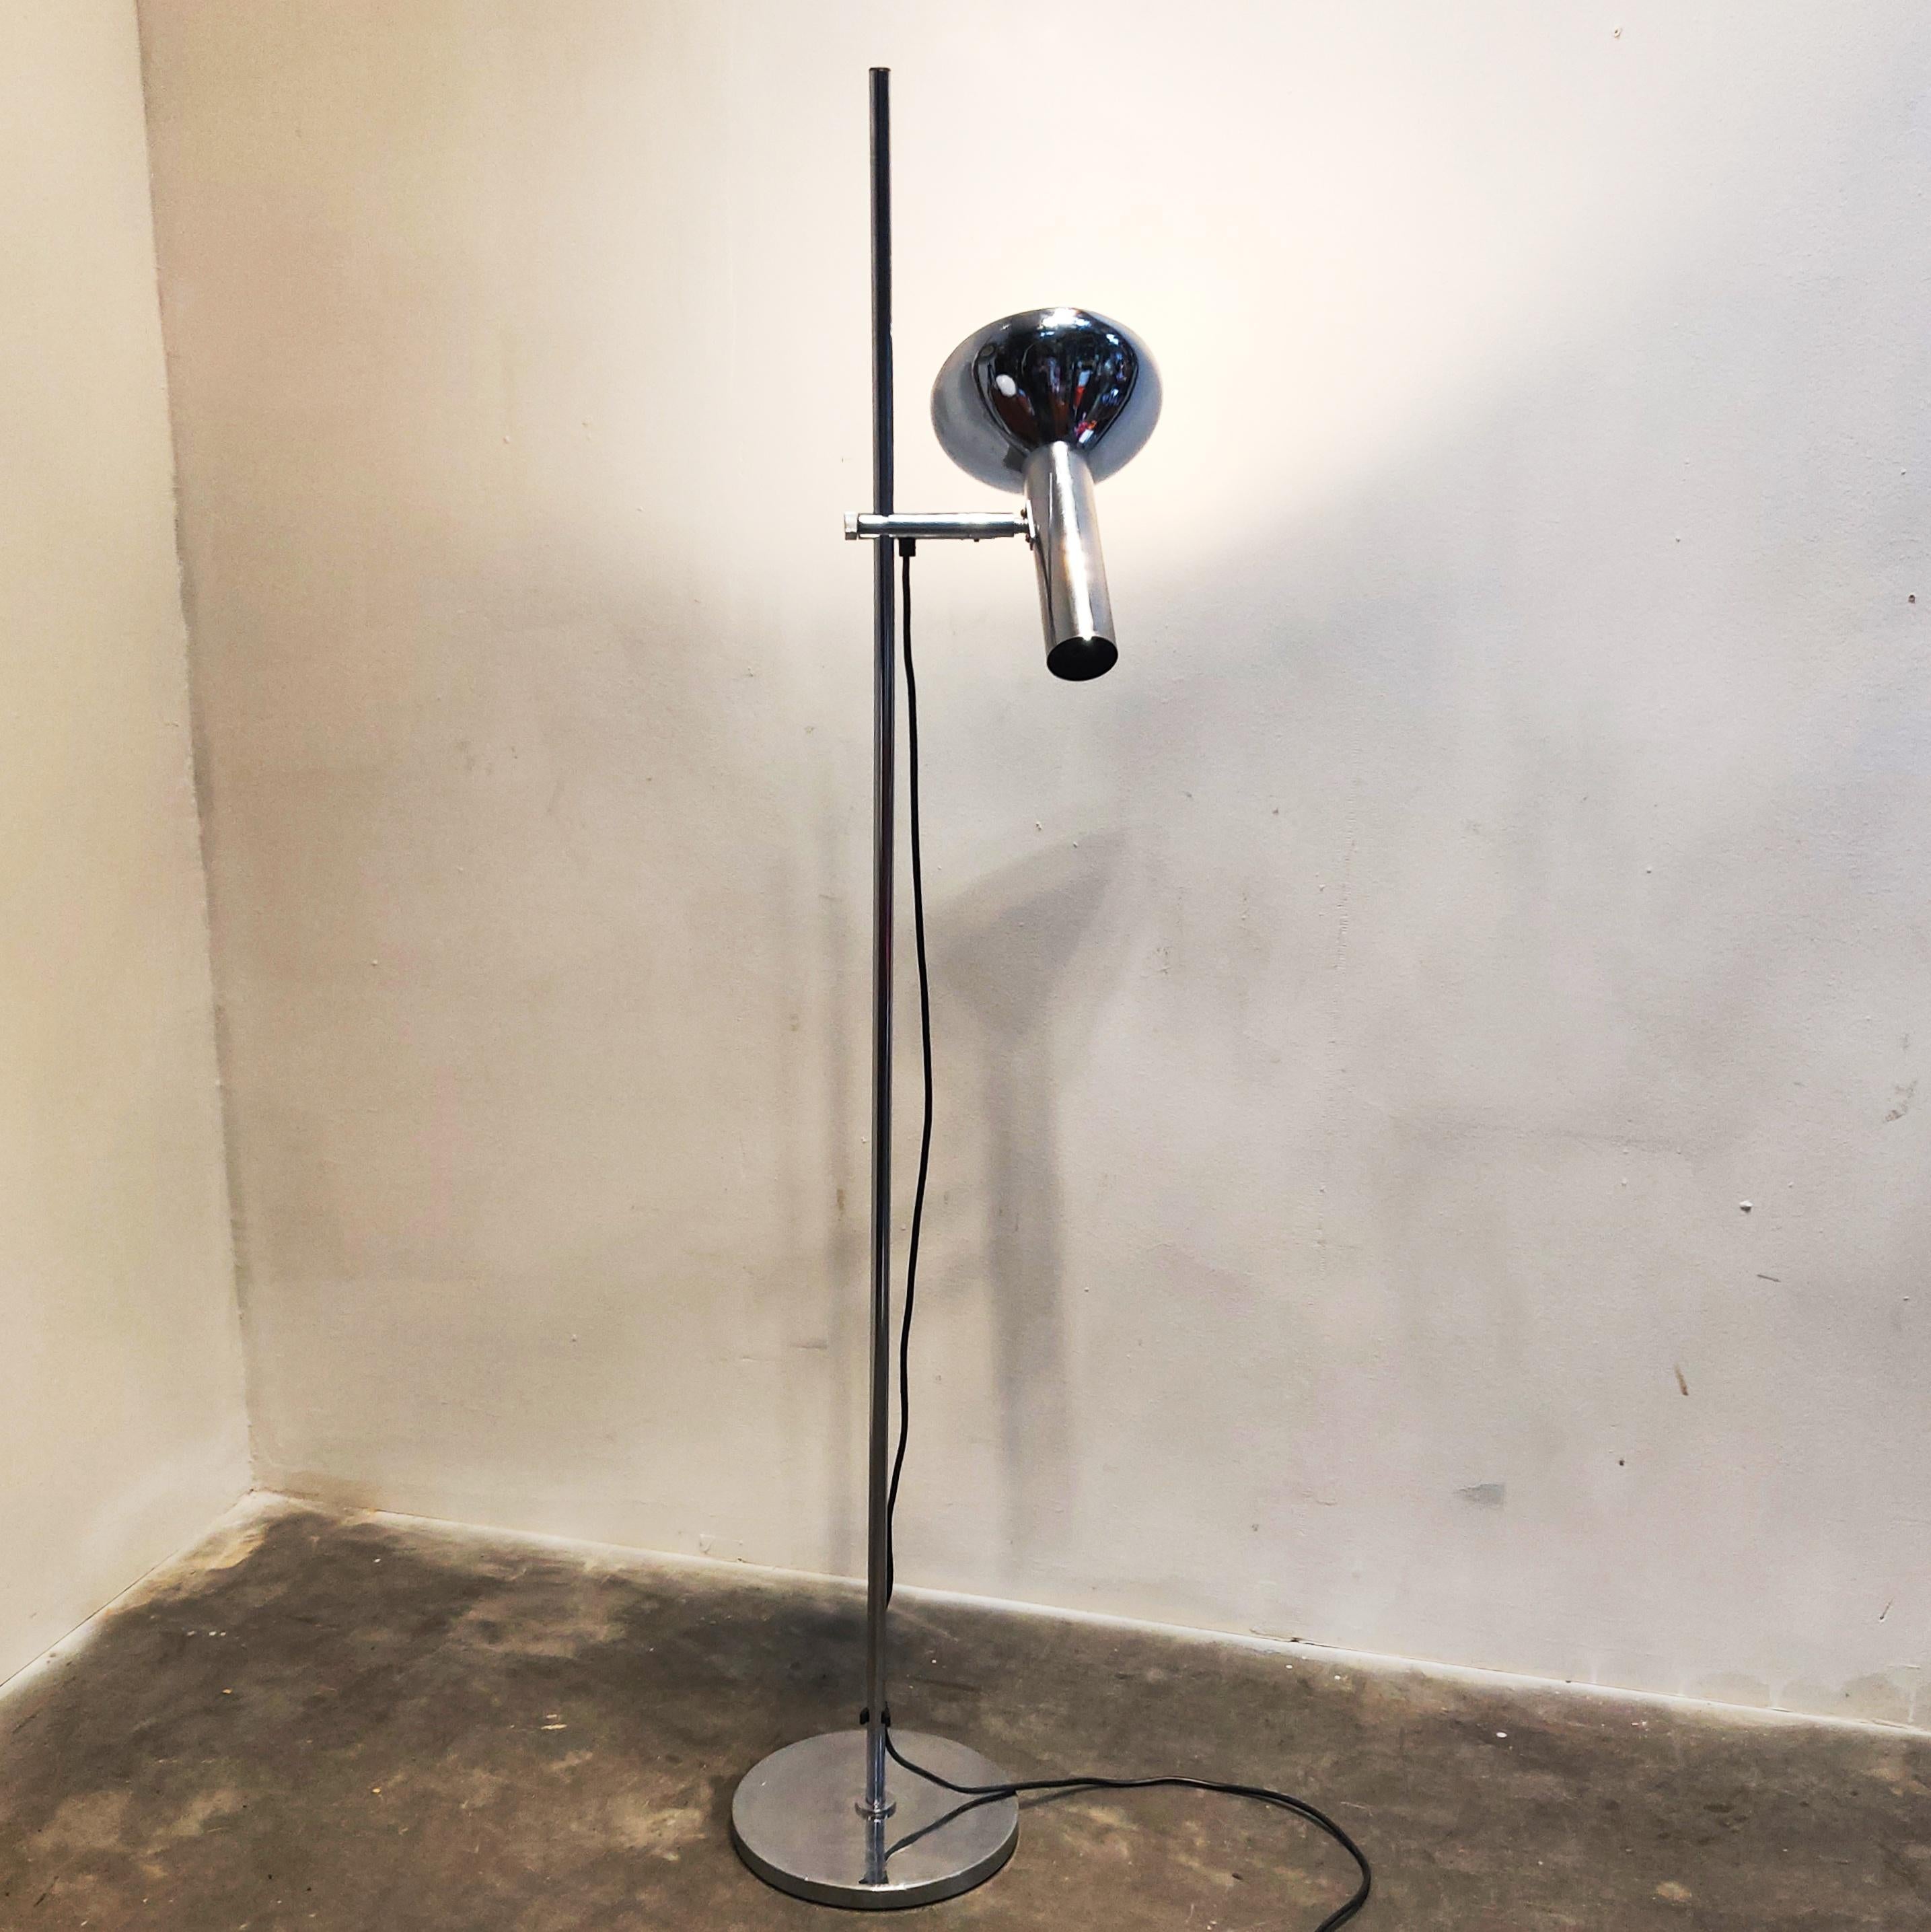 All chrome 1 spotlight floor lamp by Sölken Leuchte, 1960s.
Graceful and heavy 1960s ‘trumpet’ floor lamp produced by the Sölken Leuchten company.
Appealing organic shapes and glossy chrome material. One normal E27 light source provide a warm